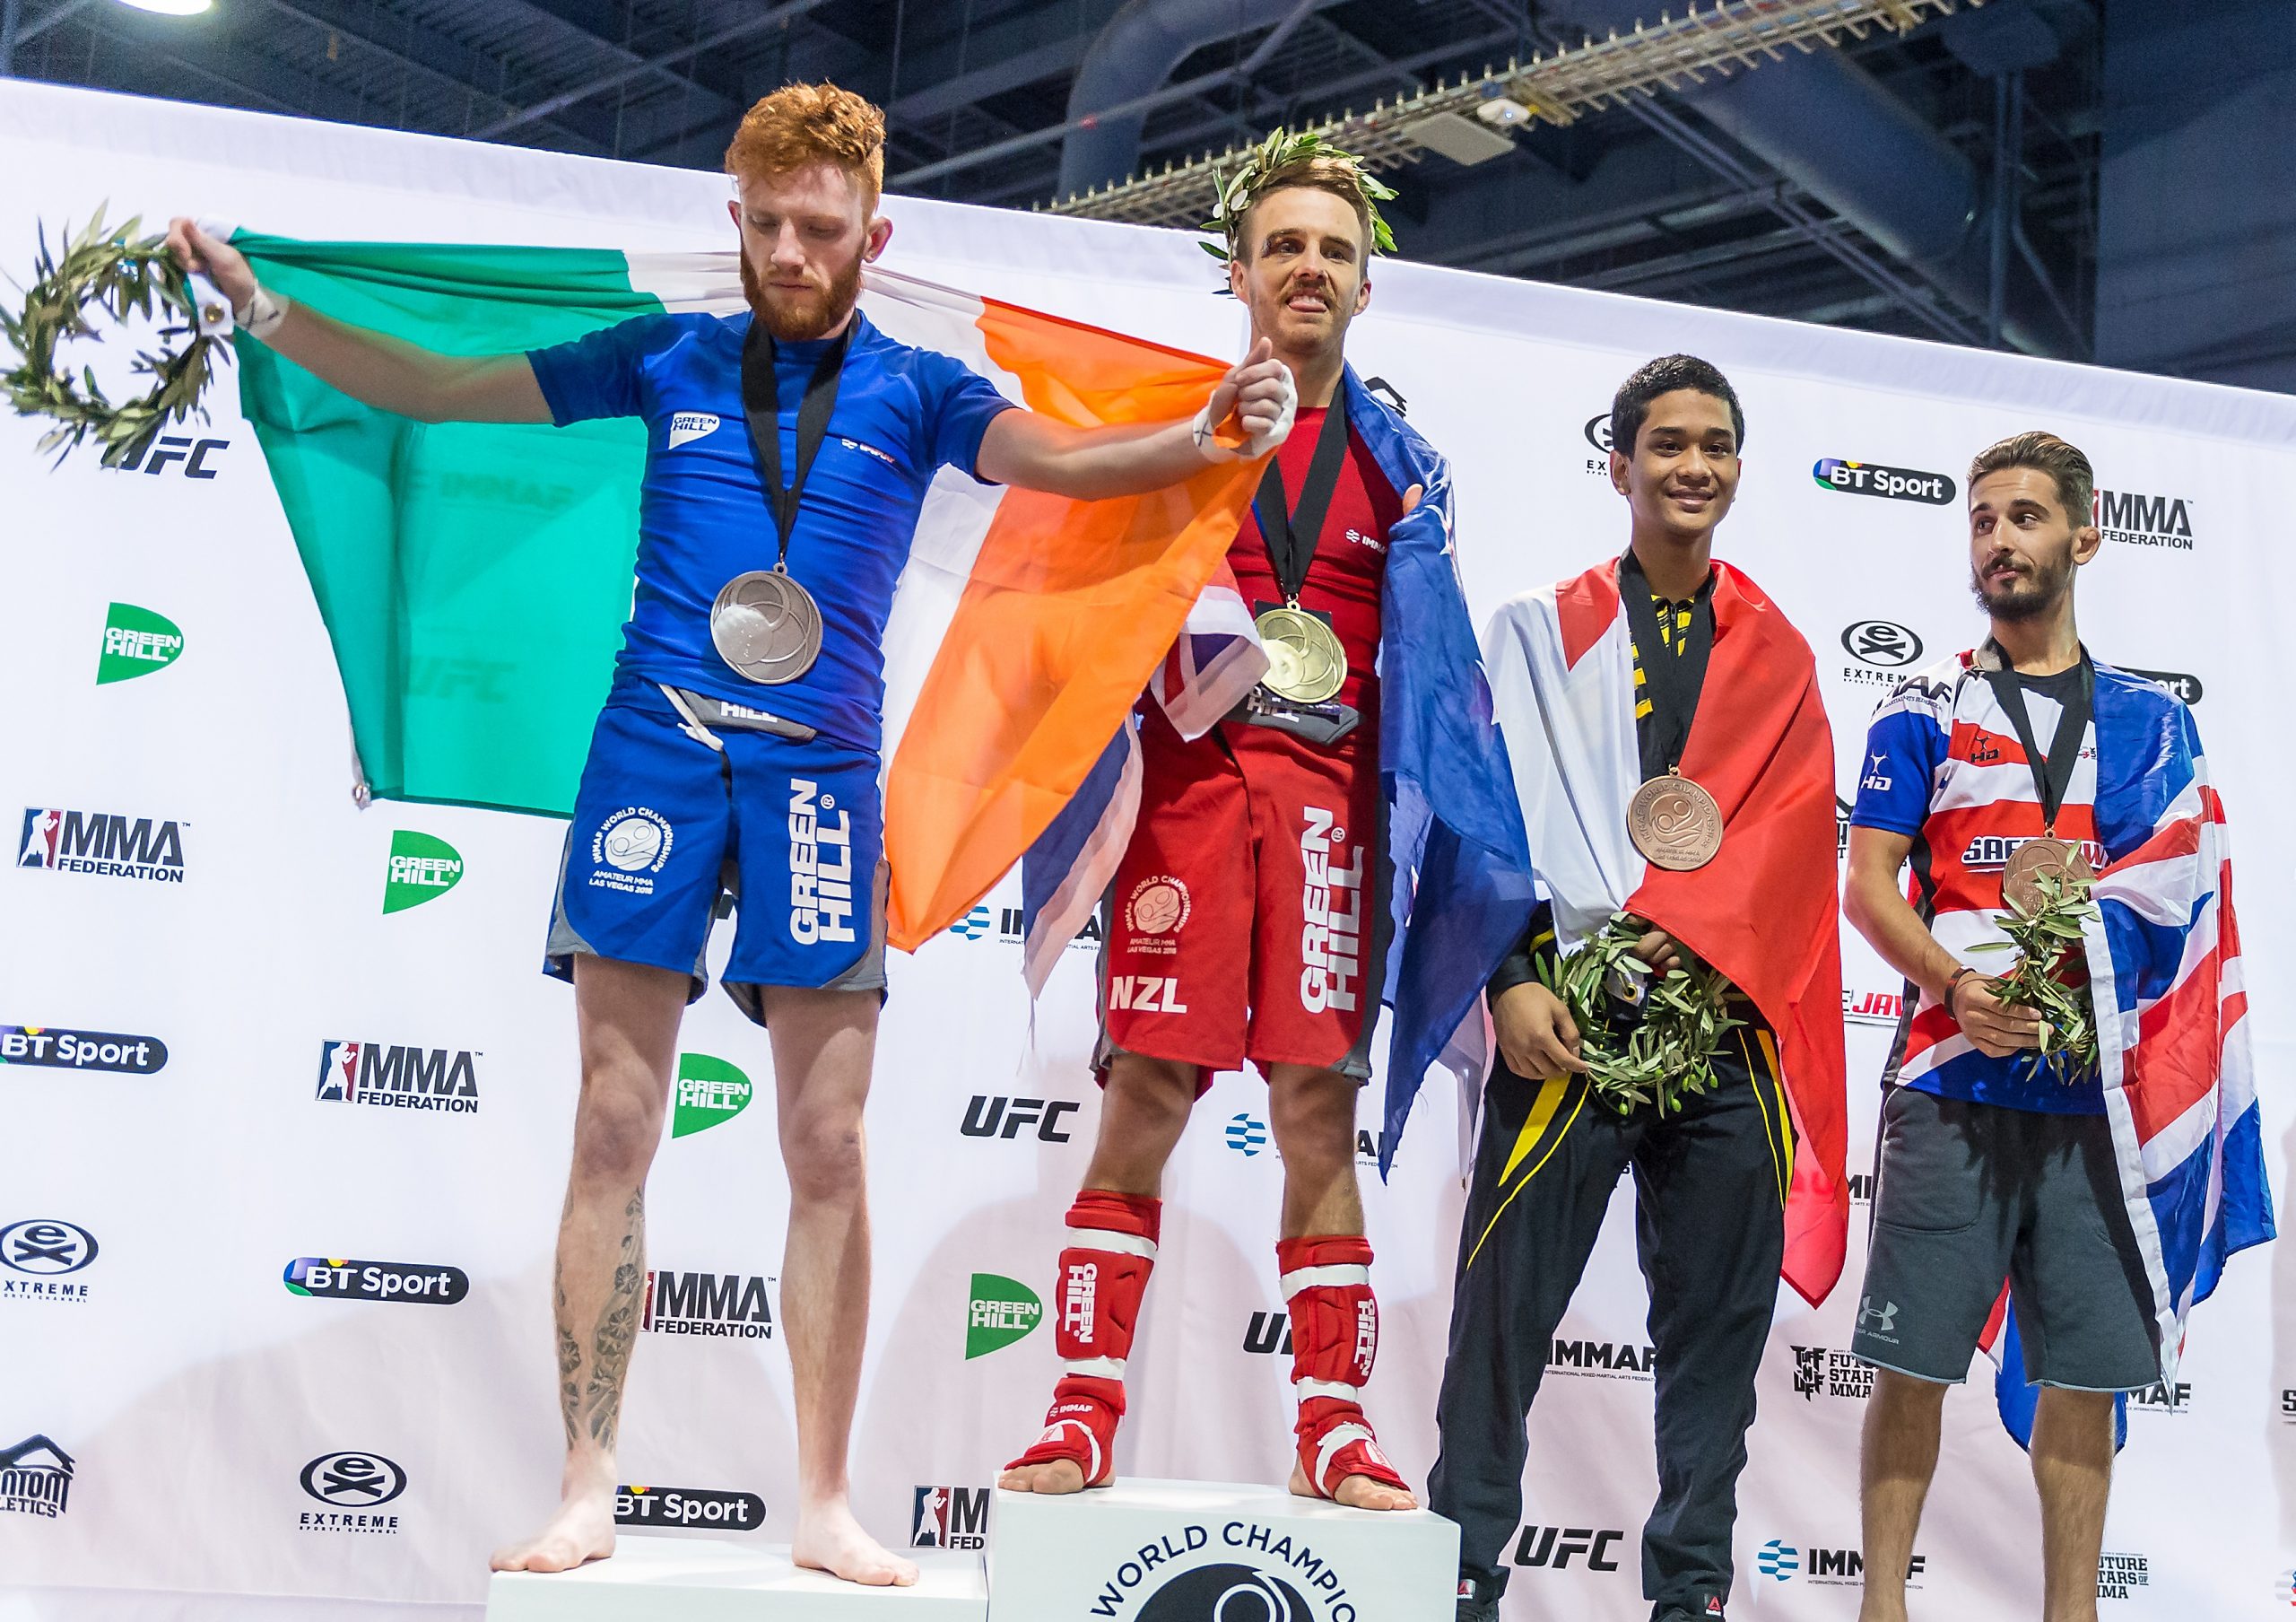 McGregor photographer David Fogarty back in action at 2017 IMMAF World Championships